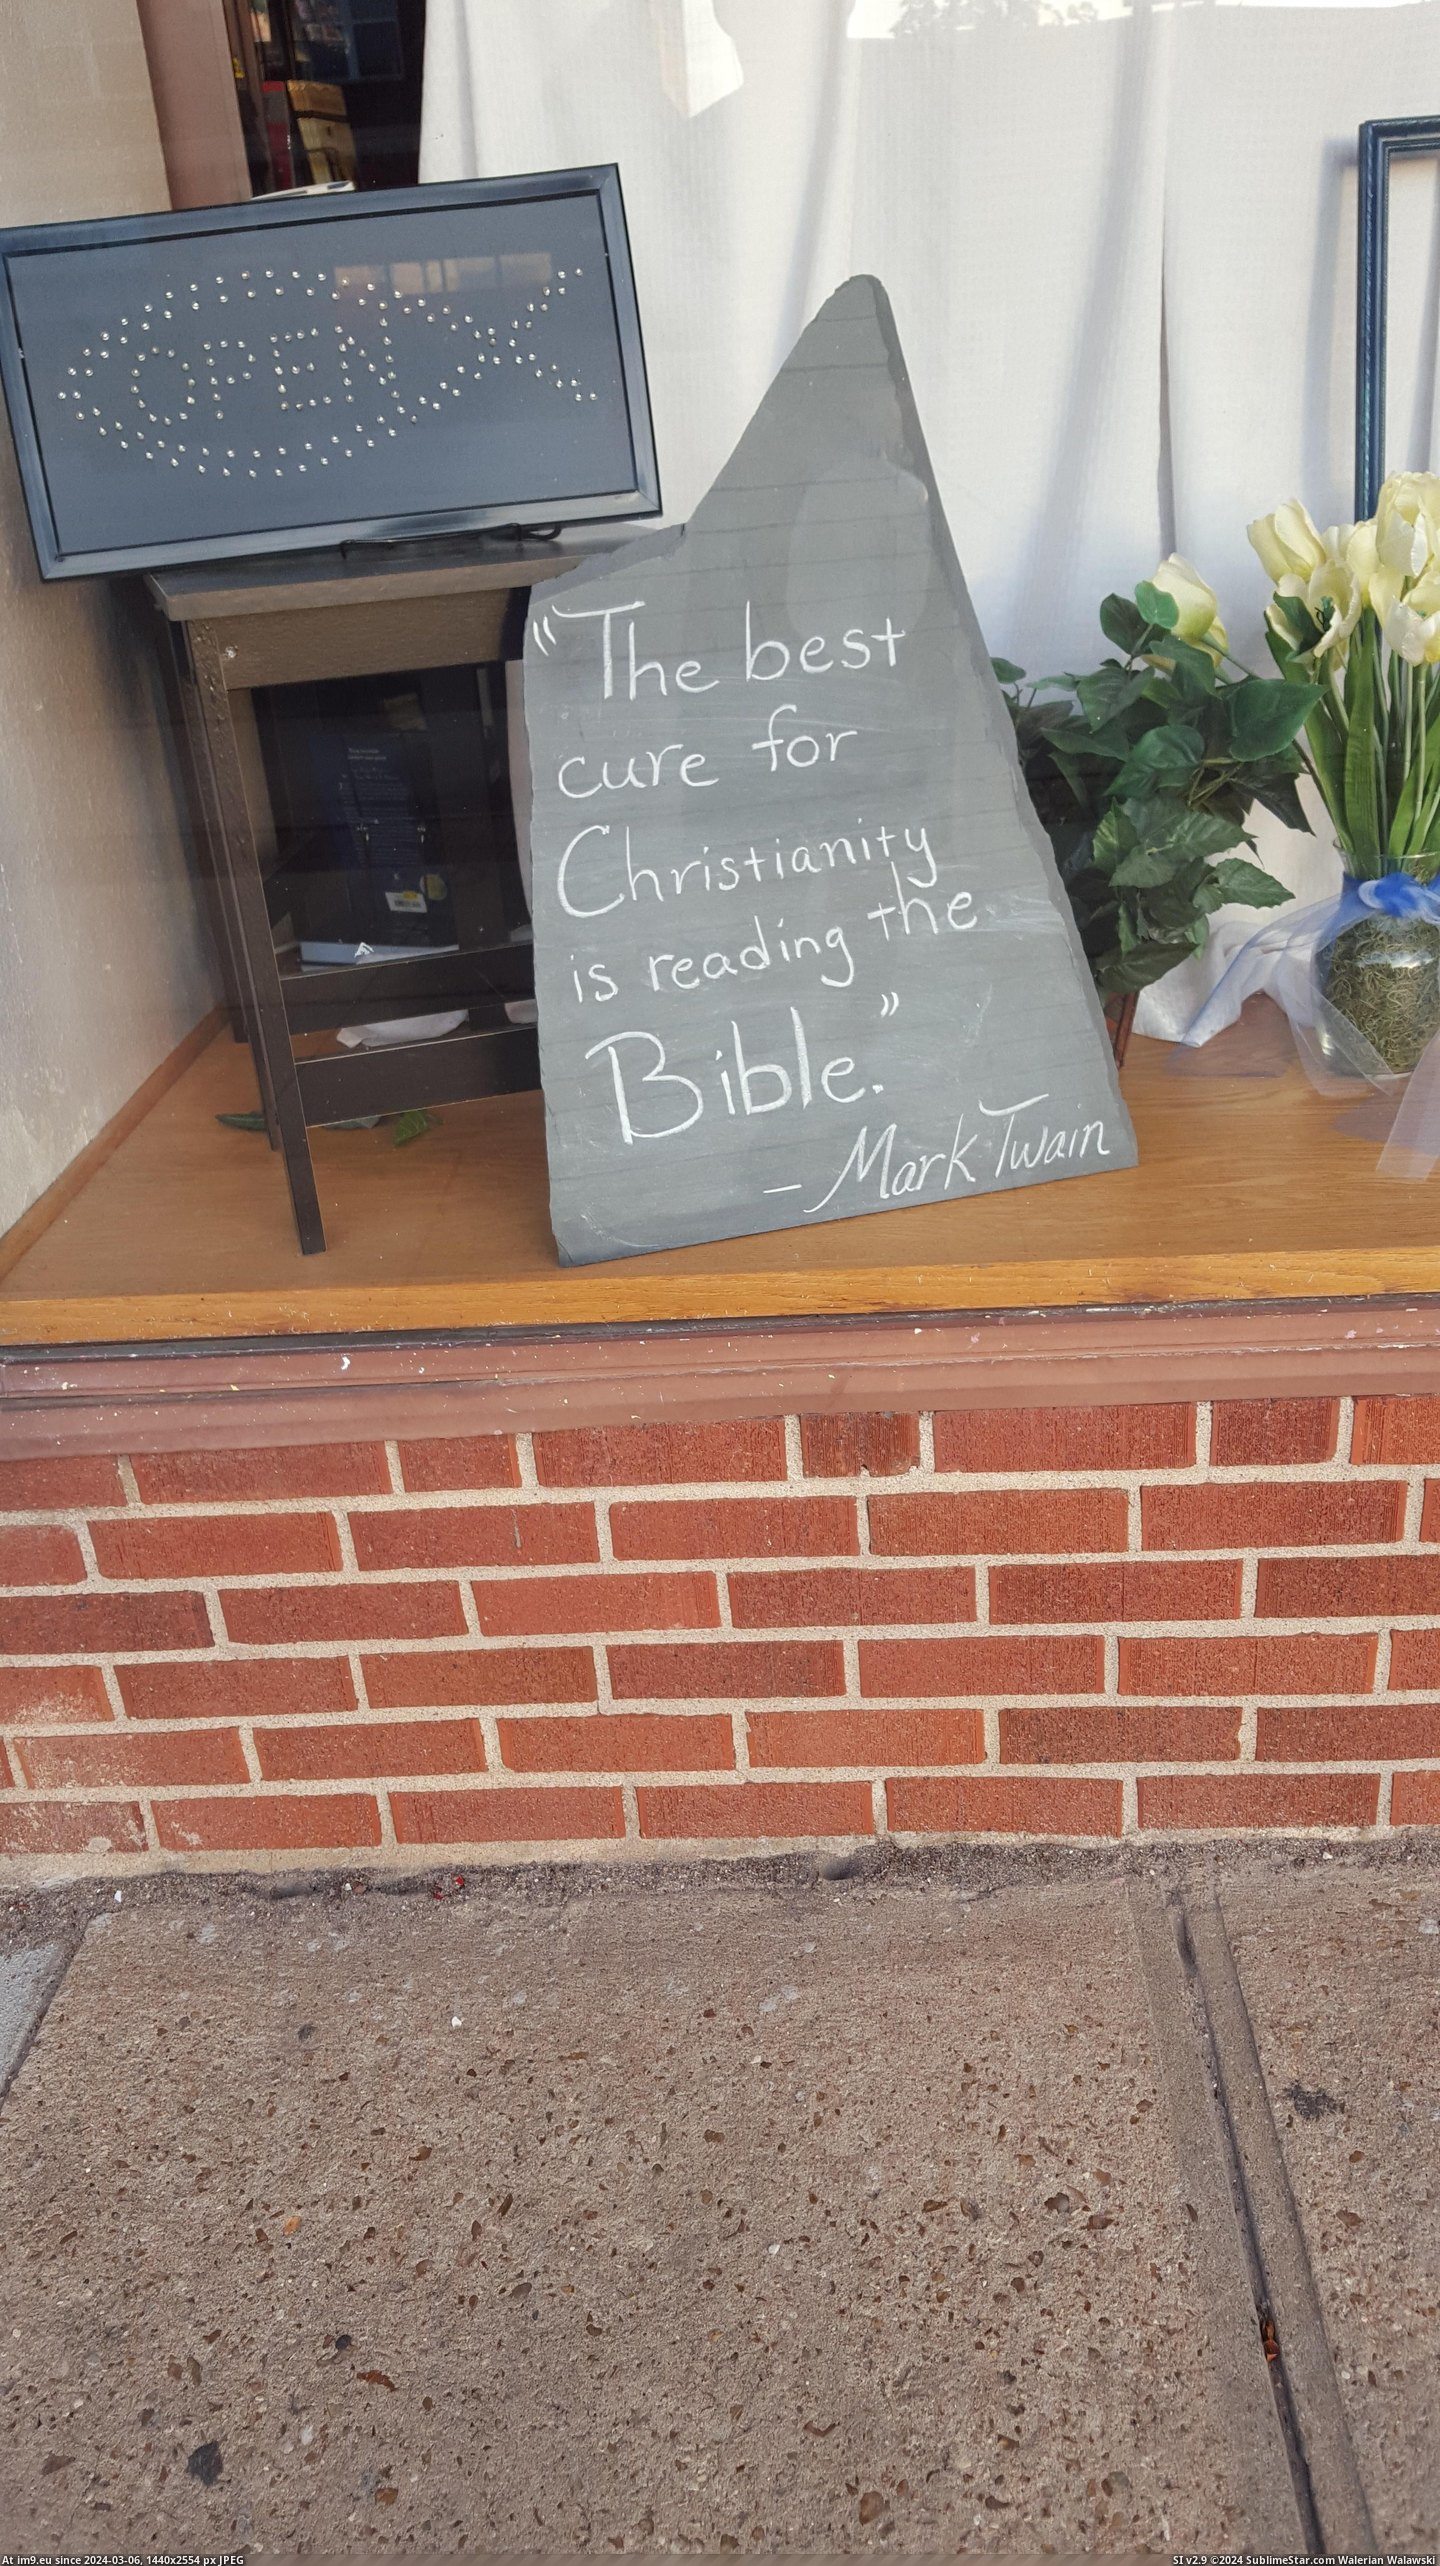 #Funny #Store #Trouble #Meaning #Understanding #Quote #Bible #Kansas [Funny] A bible store in Kansas has trouble understanding the meaning of this quote Pic. (Изображение из альбом My r/FUNNY favs))